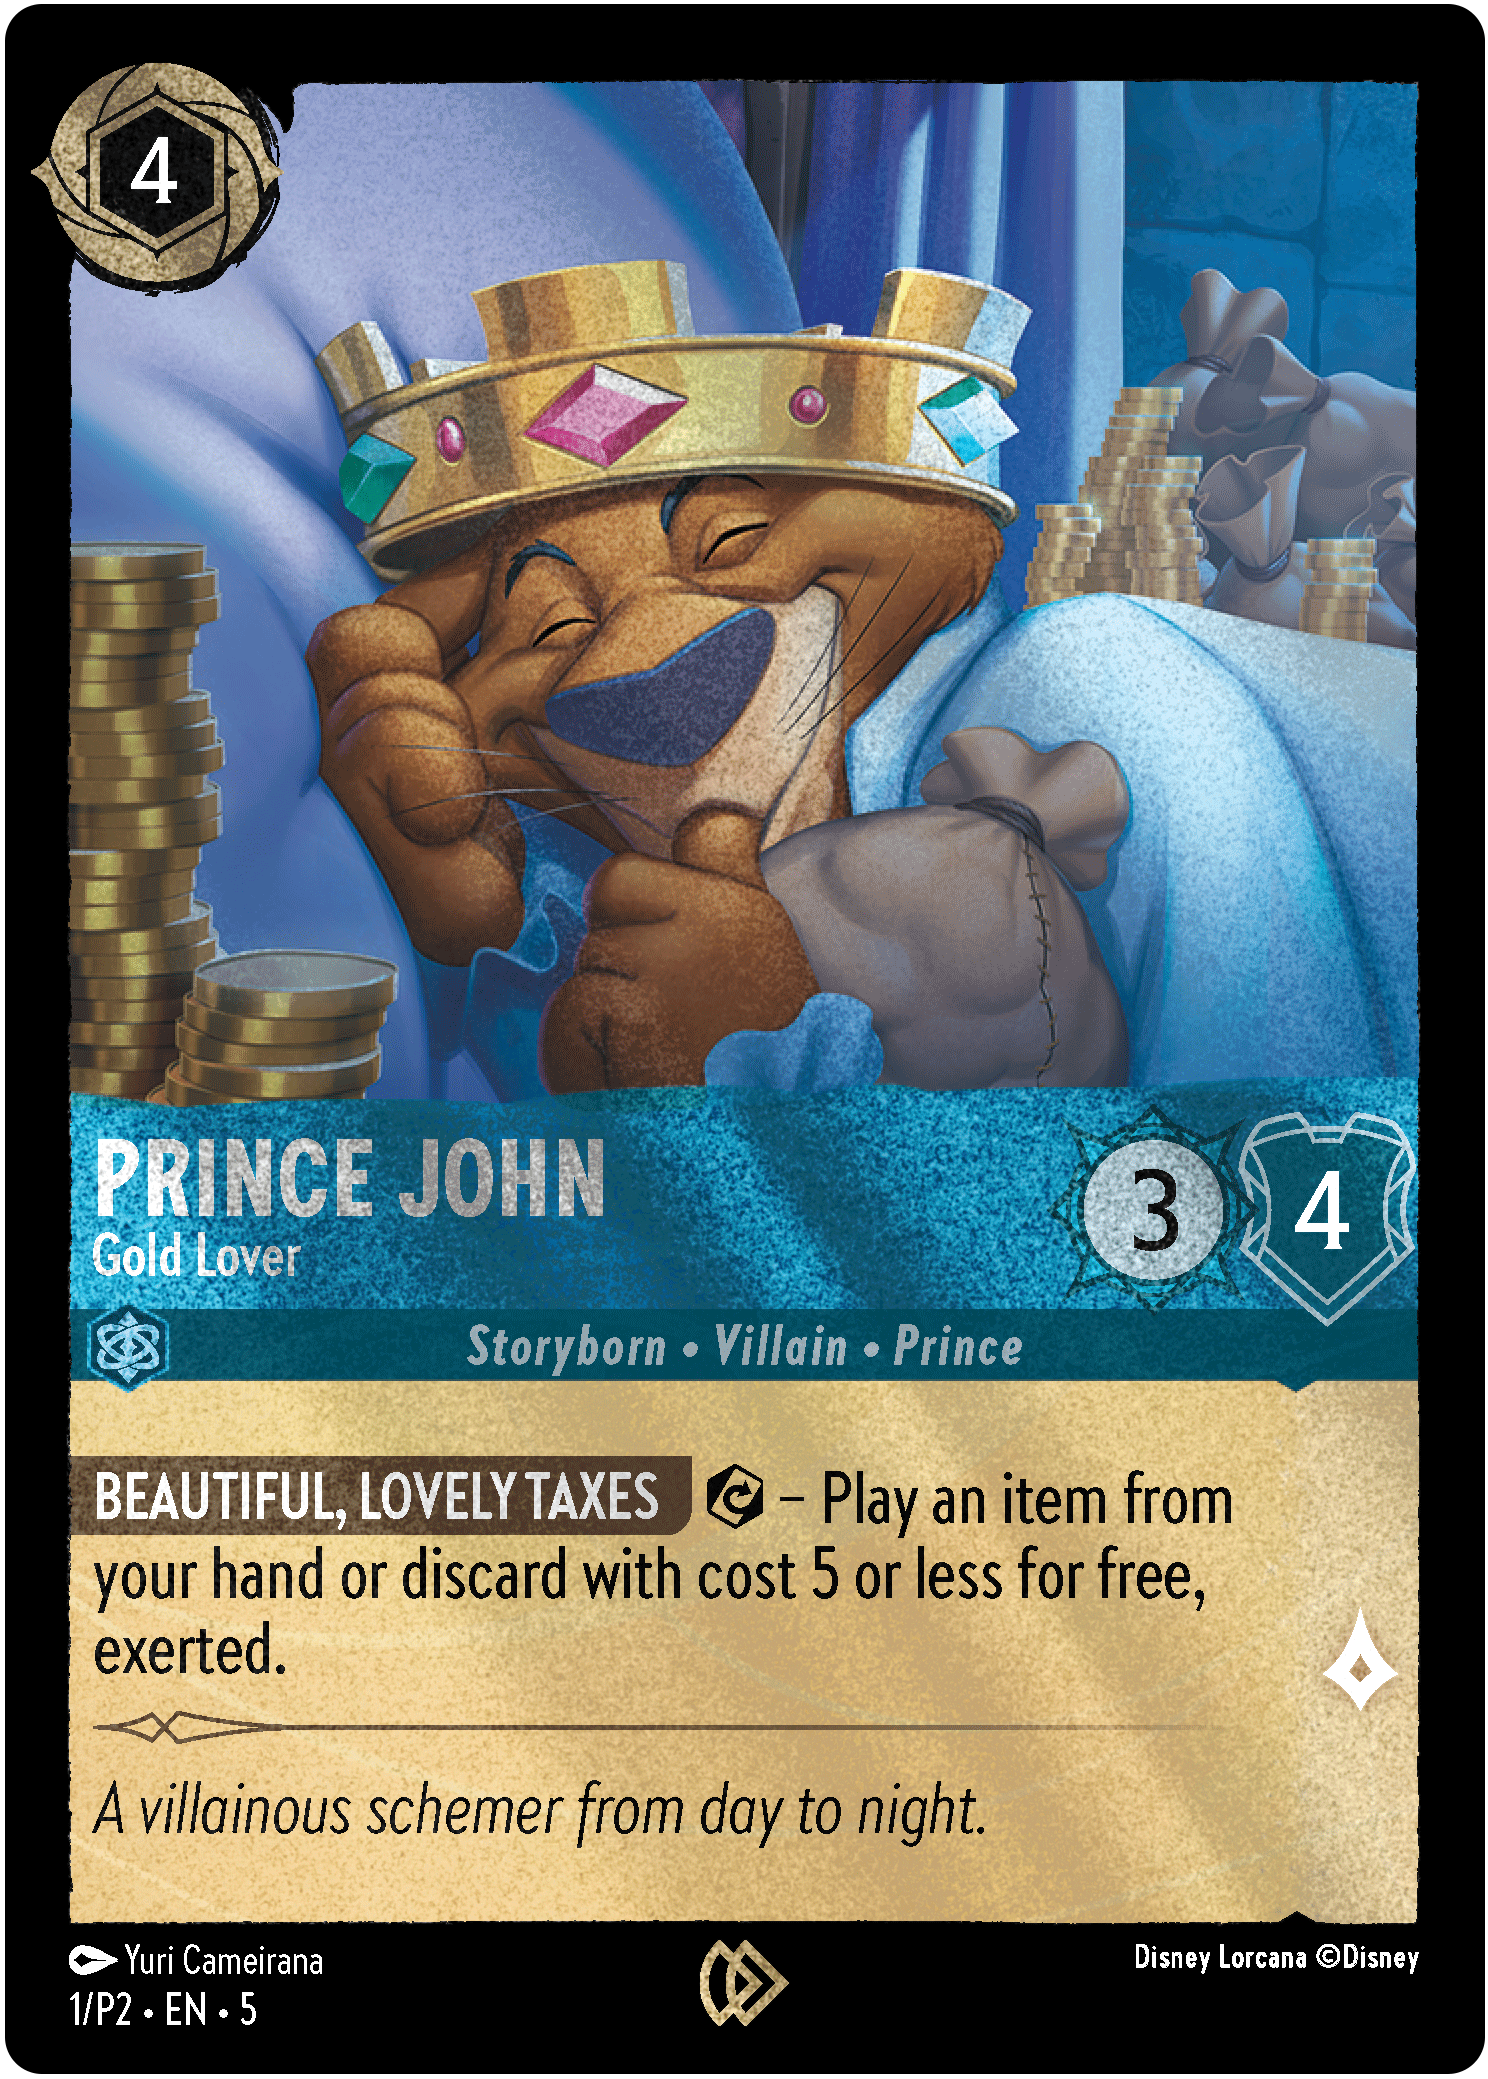 Prince John  - Gold Lover card art showing Prince John lying in bed with piles of gold